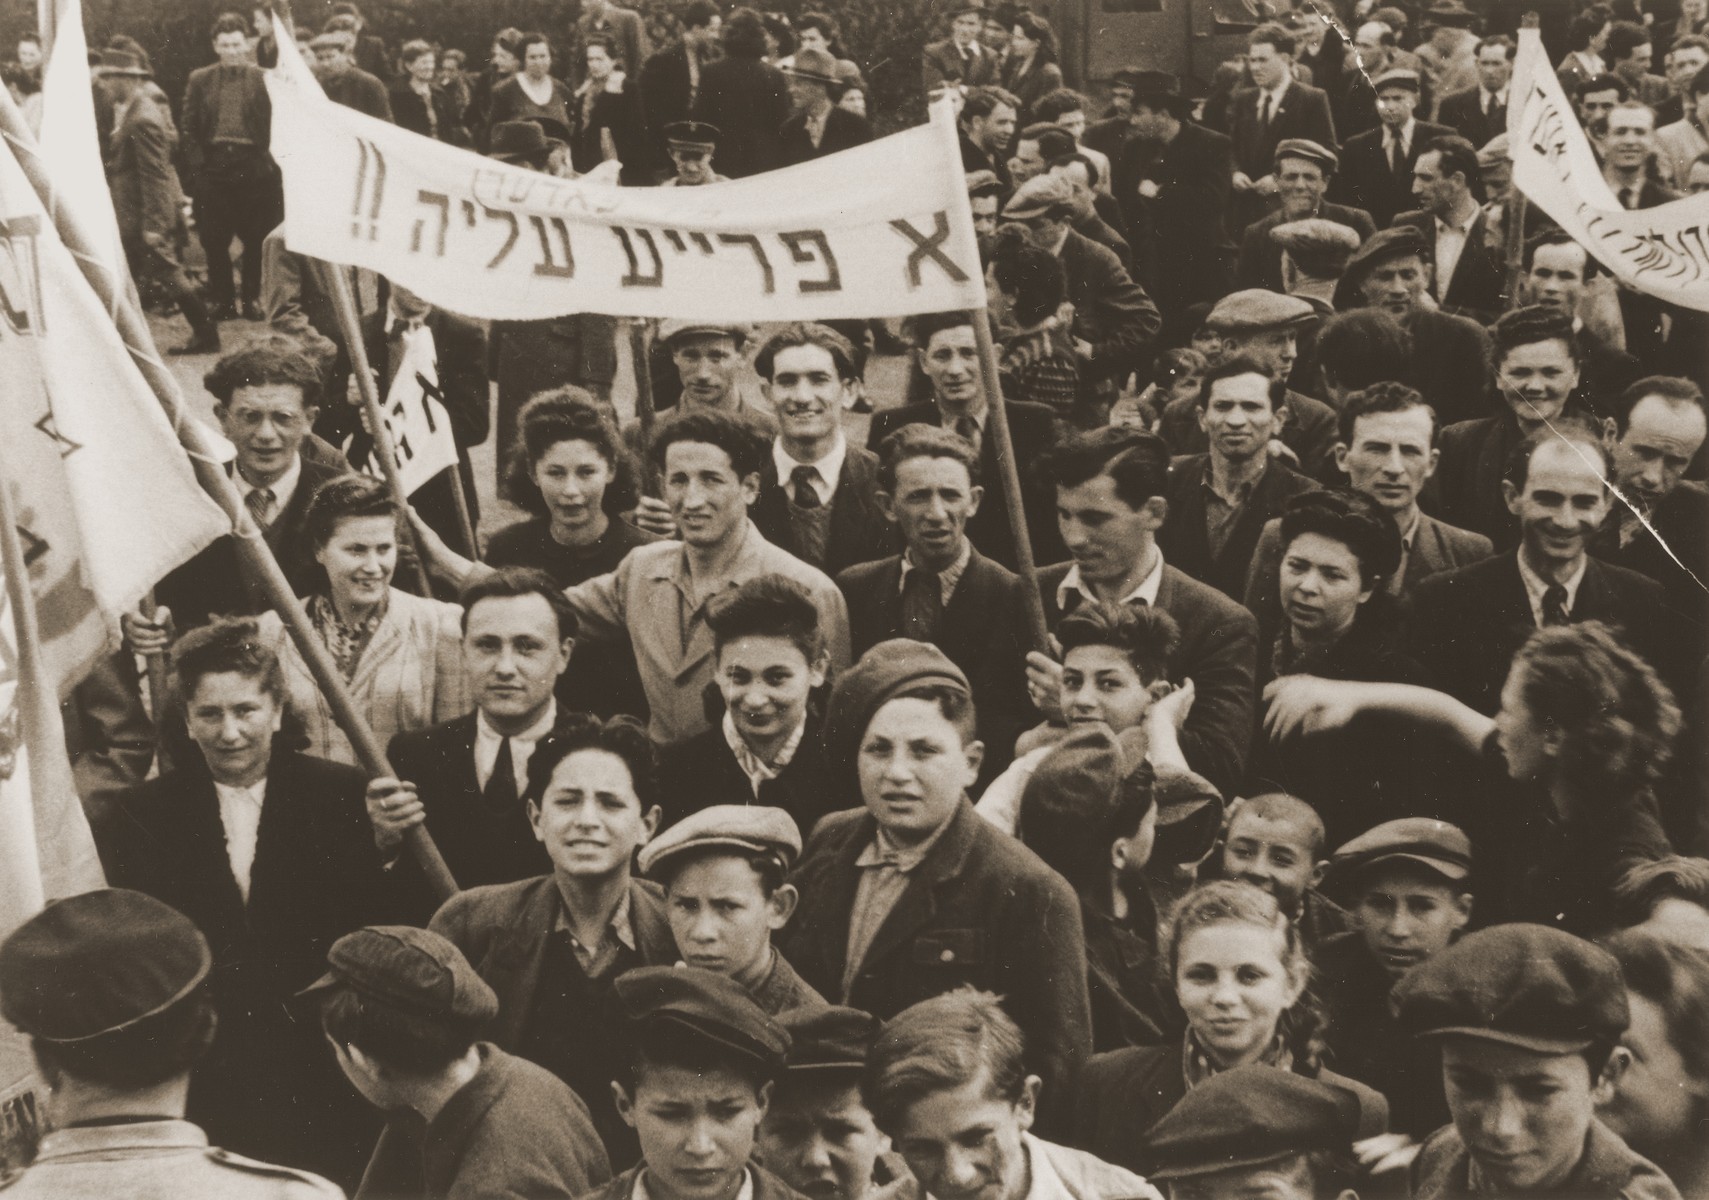 Jewish DPs in the Feldafing displaced persons camp participate in a demonstration calling for a policy of free immigration to Palestine.

The Yiddish banner reads, "We support free aliyah [immigration]."